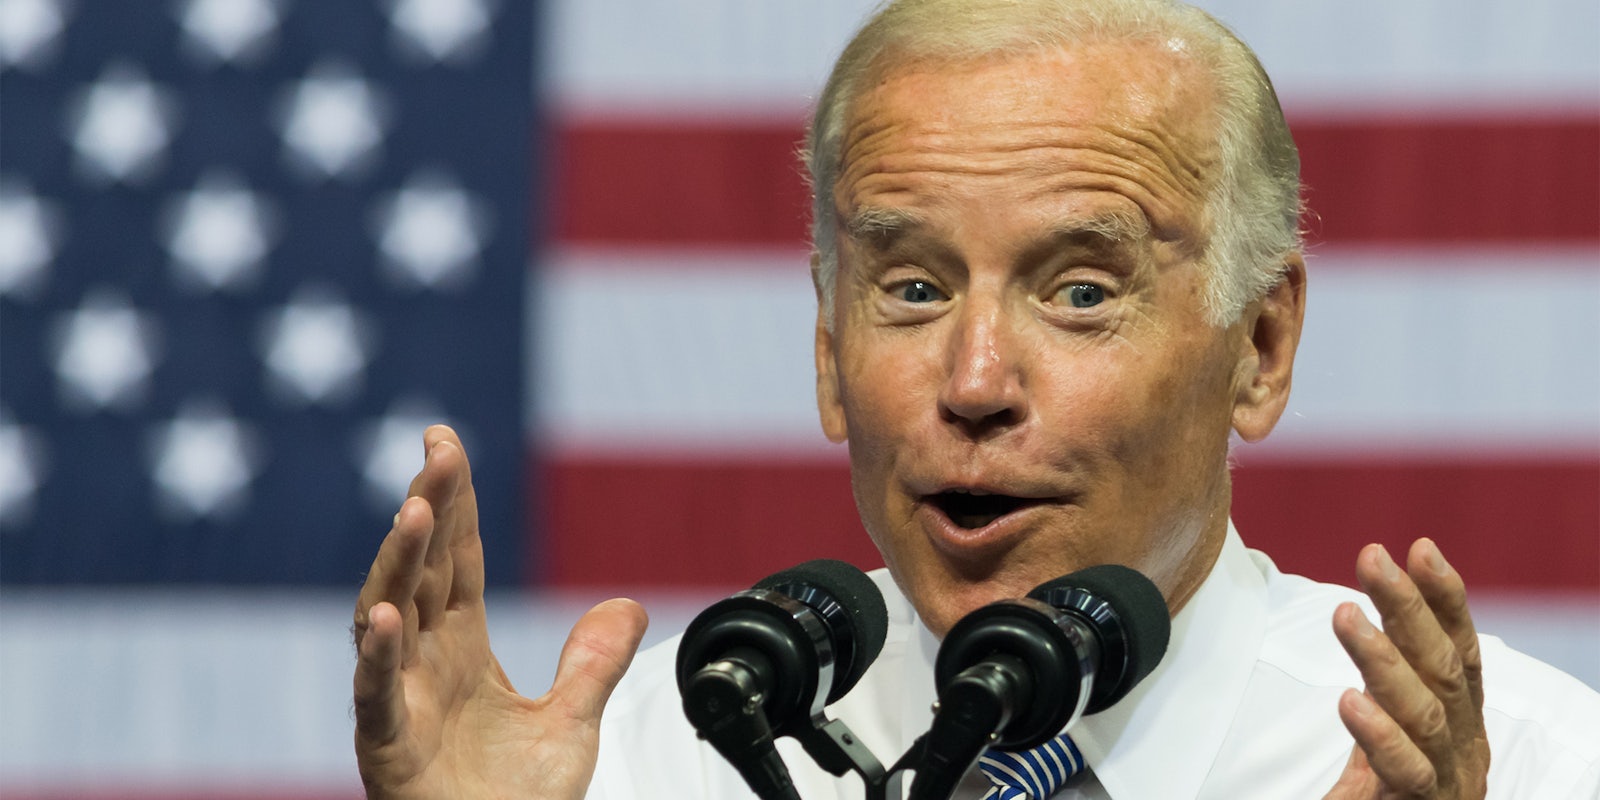 Vice President Joe Biden makes a jovial gesture while he delivers a speech at a campaign event for democratic presidential nominee Hillary Clinton.